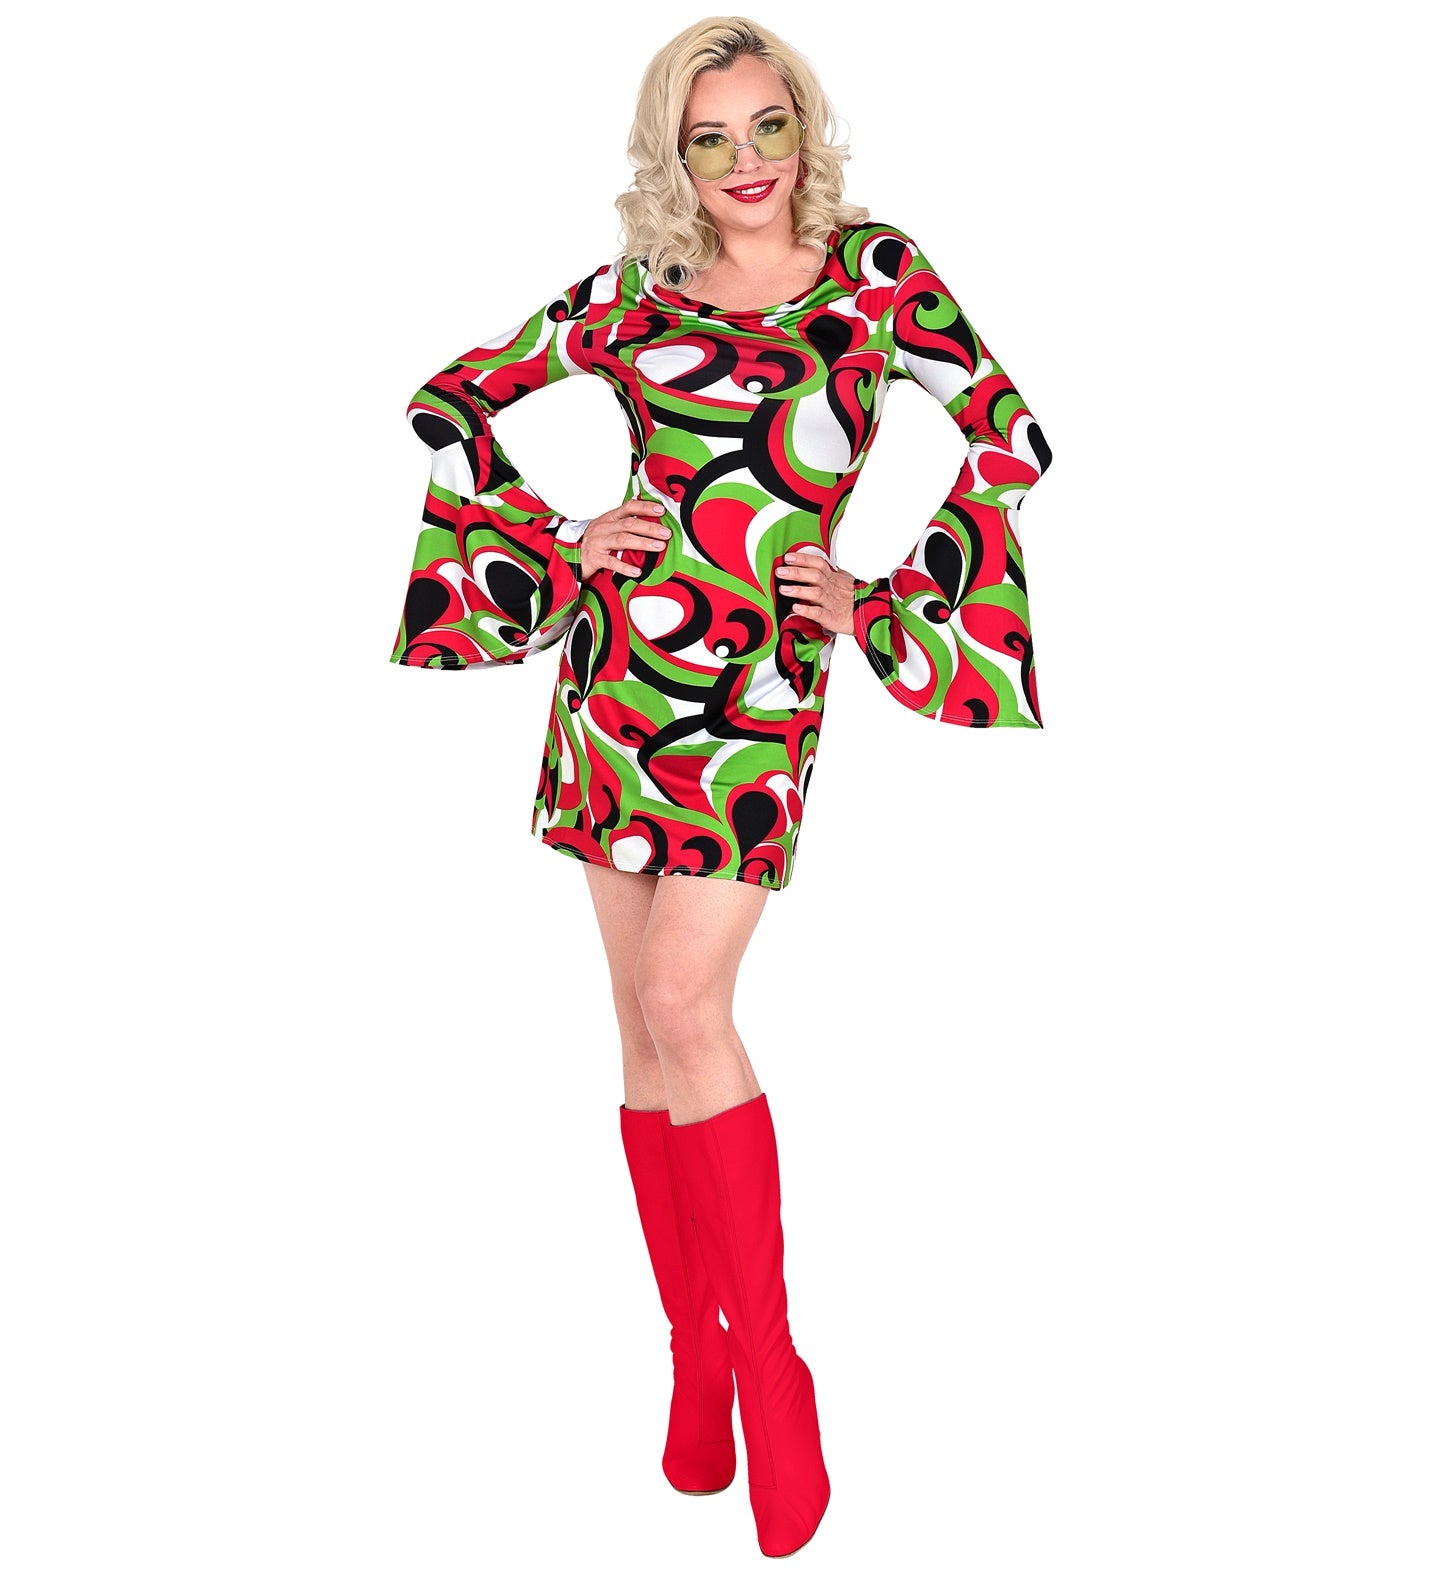 70's Psychedelic Groovy Disco dress for women